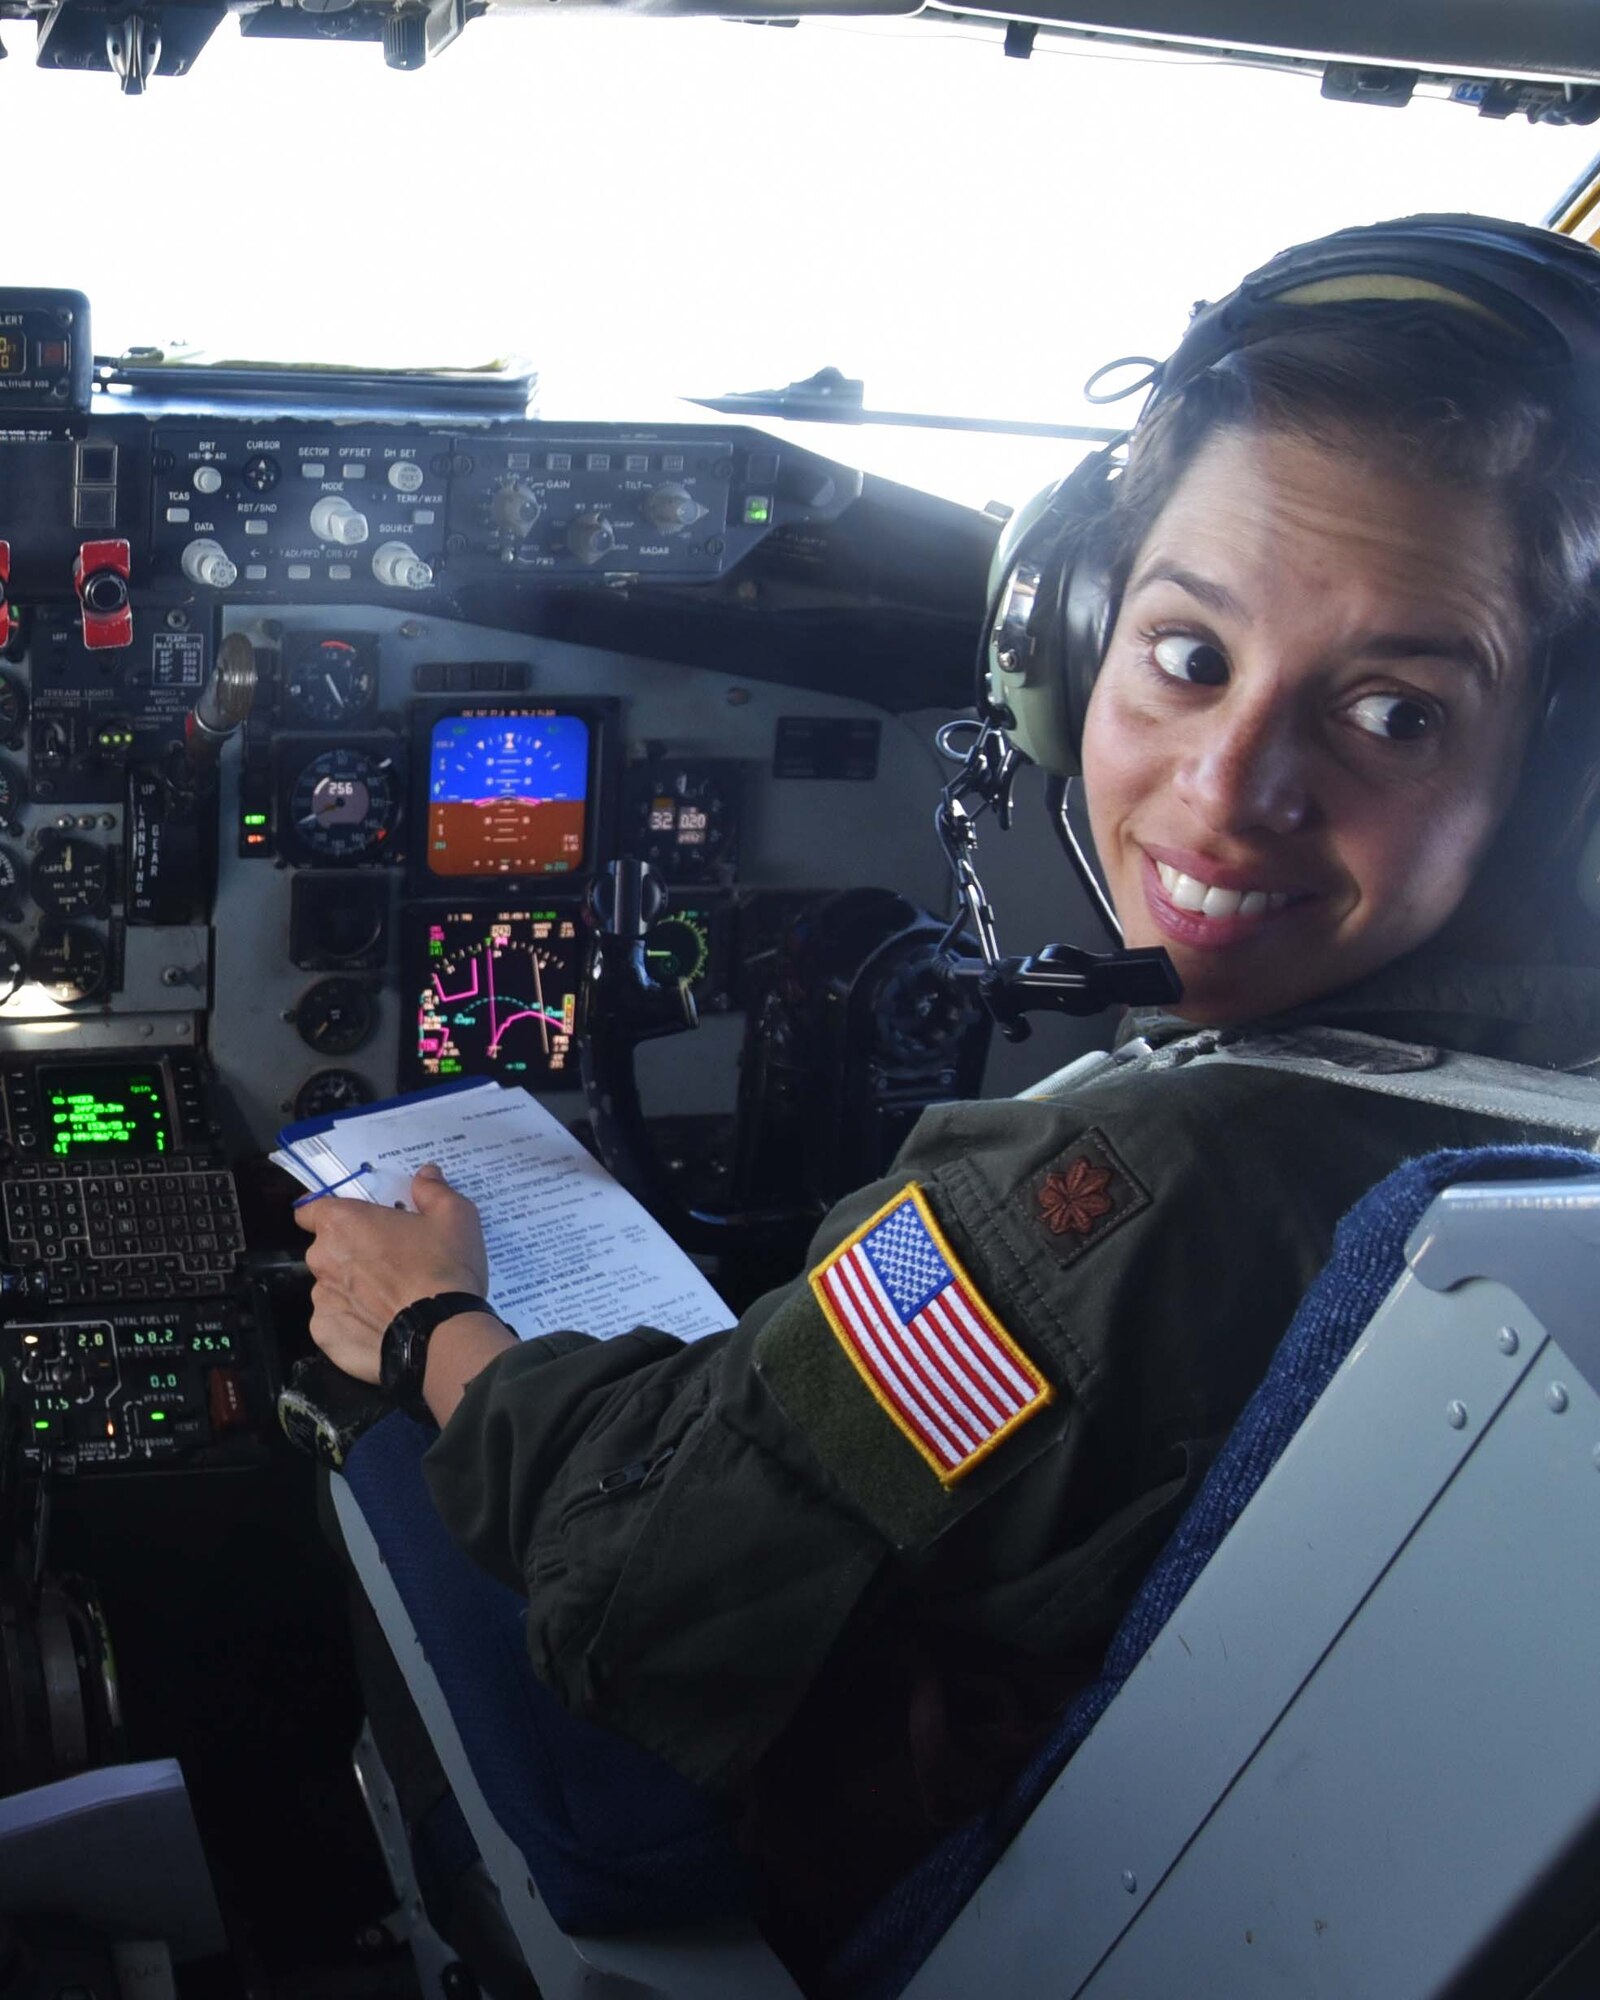 Maj. Suzanne Crespo Valentin, 18th Air Refueling Squadron pilot, flys a KC-135 Stratotanker during an 'unmanned' flight, April 9, 2019. Valentin was part of a five-person, all-female aircrew. During the flight, the crew performed air refueling for F-16 Fighting Falcons from the 54th Fighter Squadron out of Holloman Air Force Base, N. M